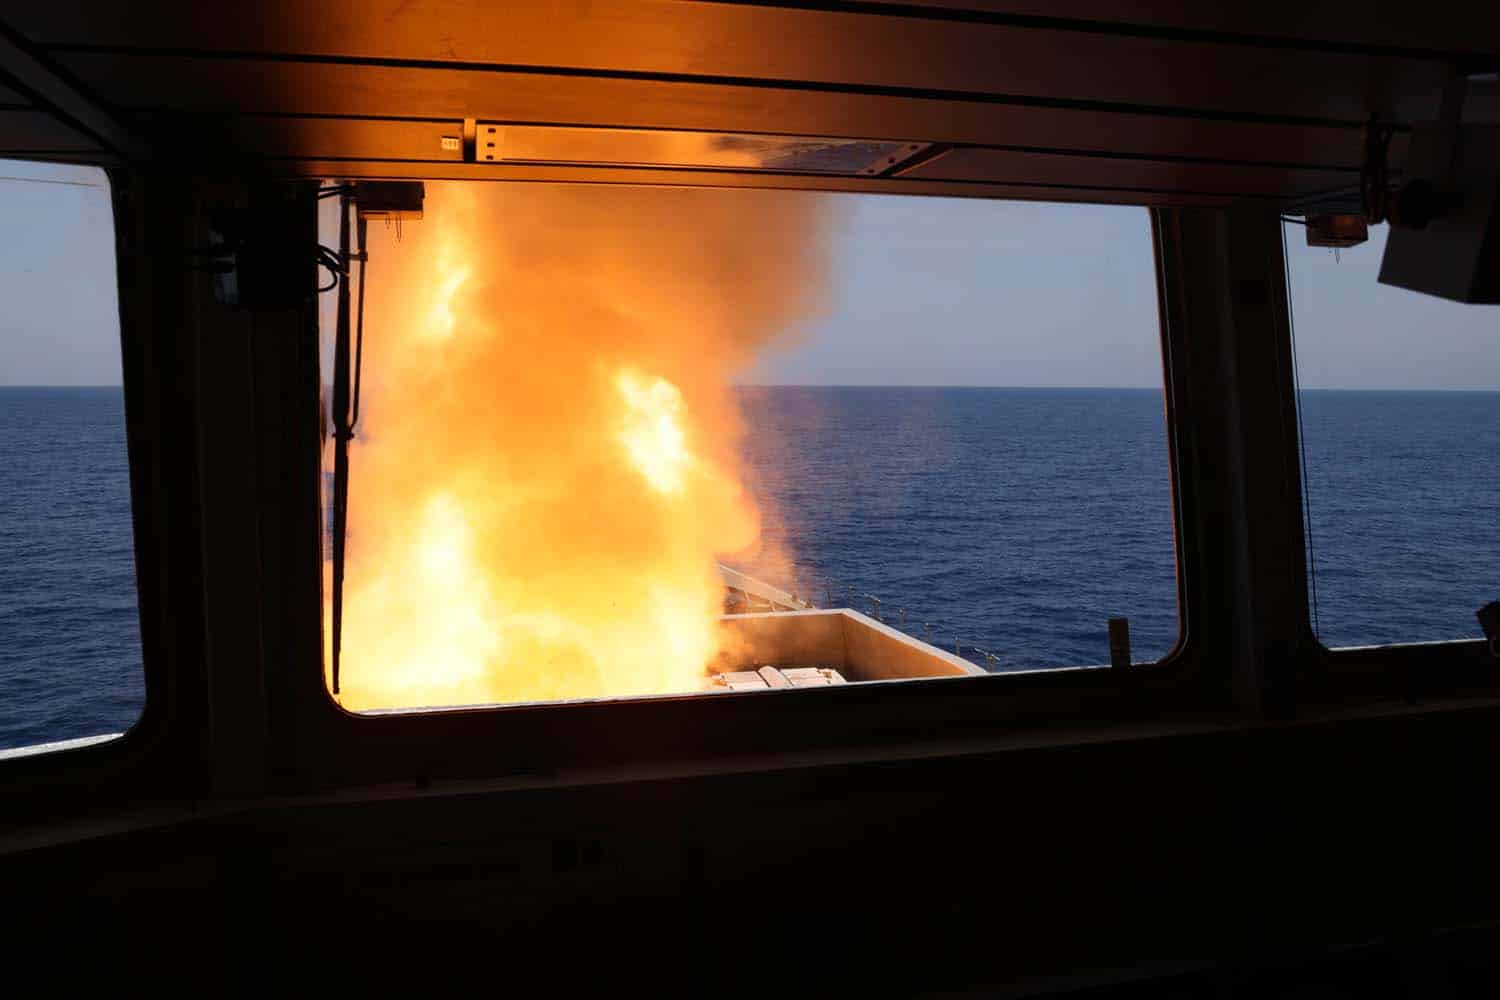 Royal Navy Air-defence Guided Missile Destroyer HMS Diamond Shoots Down Houthi Missile